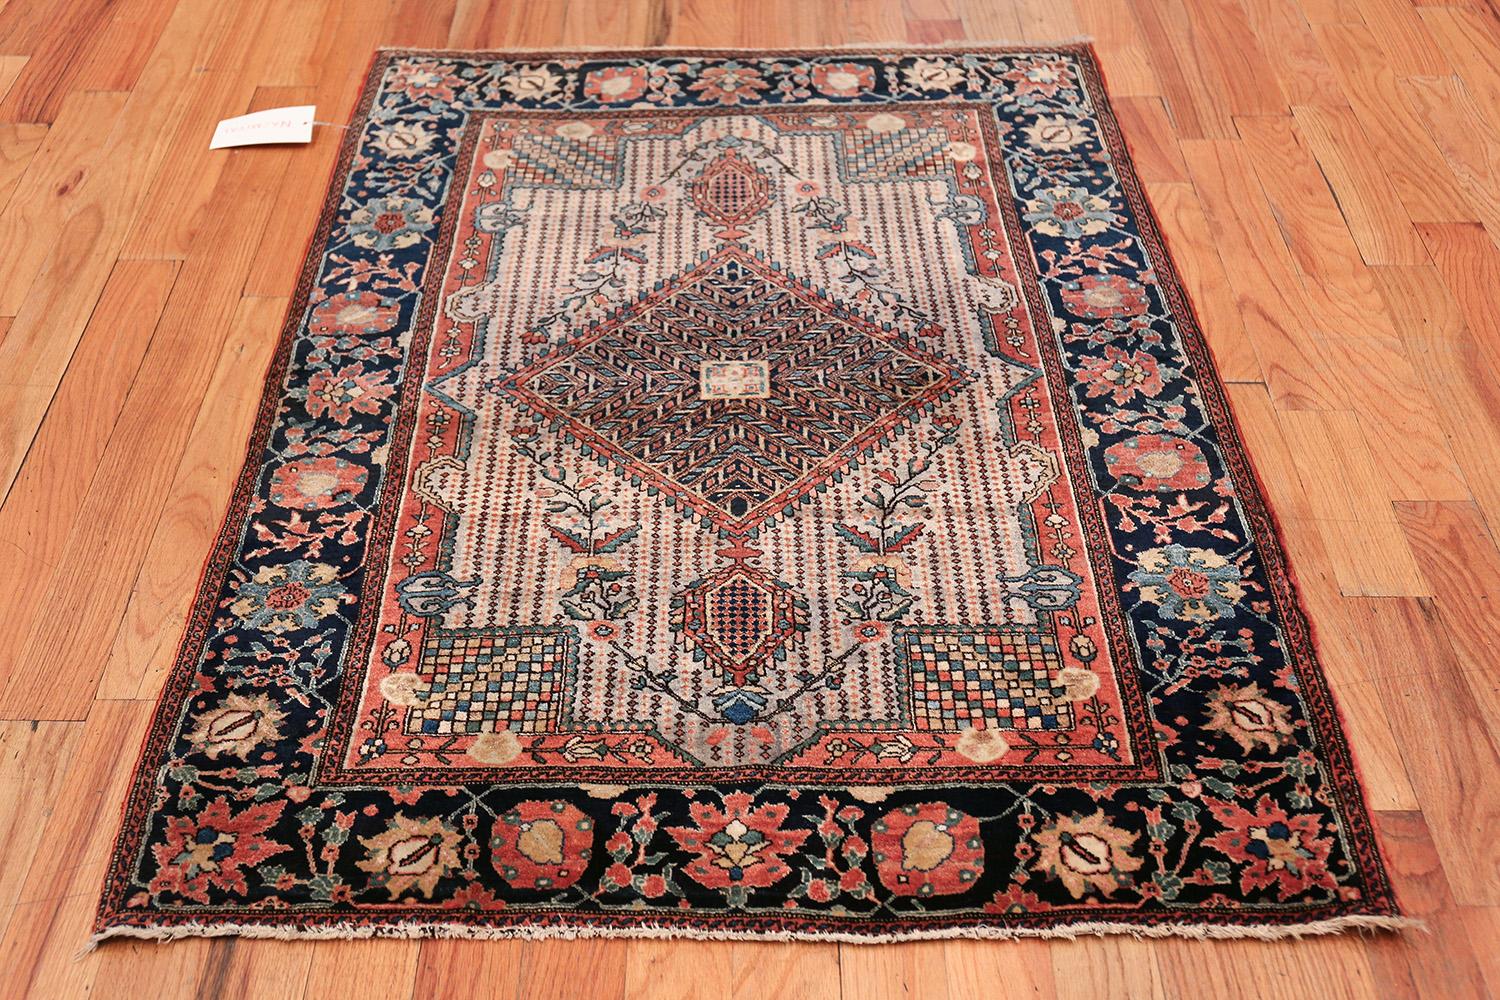 Magnificent Small Size Antique Persian Farahan Sarouk Rug, Country of Origin / Rug Type: Persian Rug, Circa Date: 1900 – Tones of earth and water bring a garden to life in this breathtakingly complex antique Persian Sarouk Farahan rug. The central